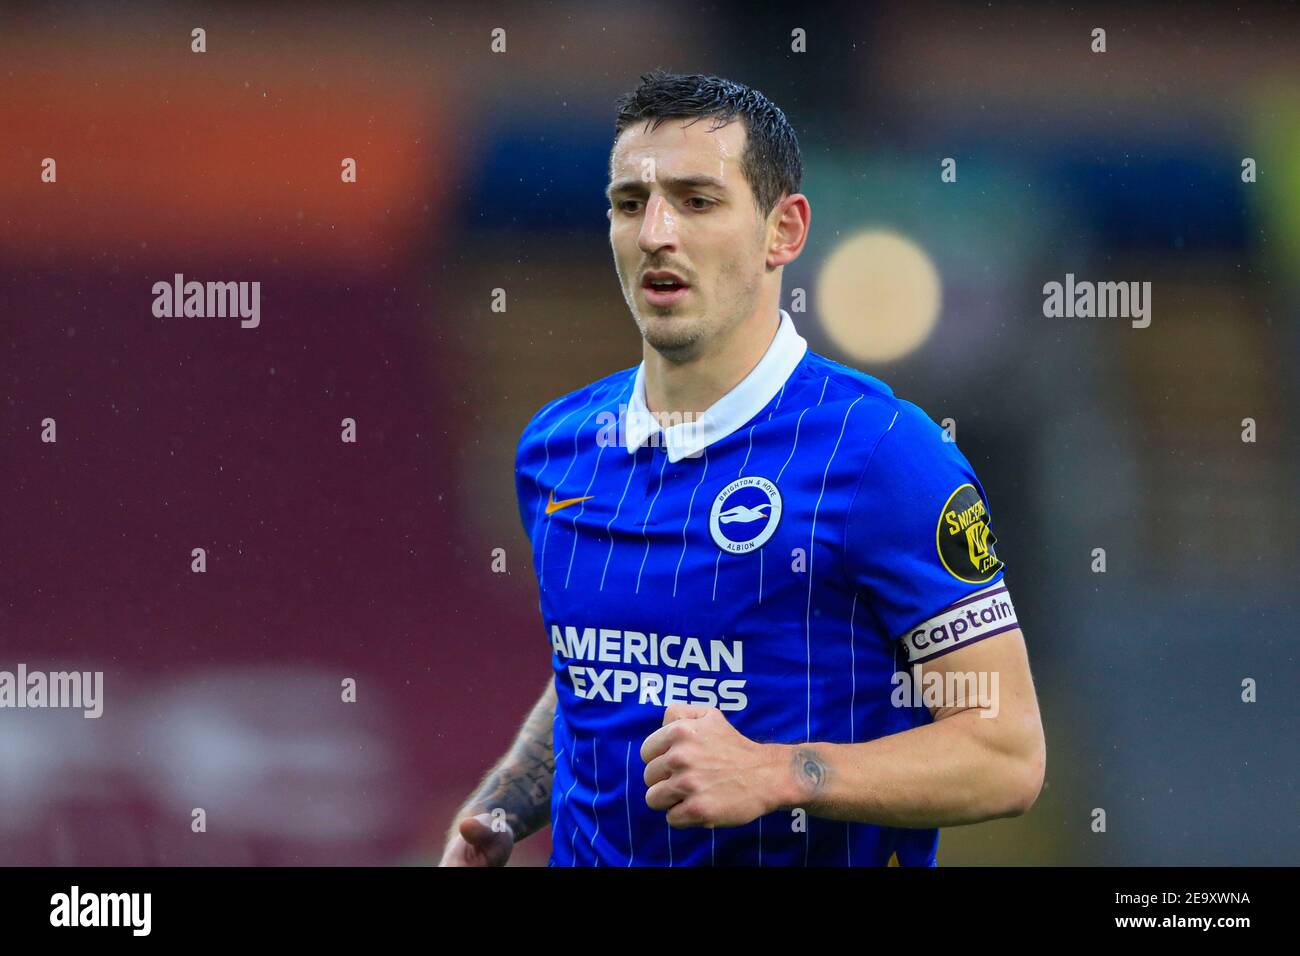 Burnley, UK. 06th Feb, 2021. Lewis Dunk #5 of Brighton & Hove Albion in Burnley, UK on 2/6/2021. (Photo by Conor Molloy/News Images/Sipa USA) Credit: Sipa USA/Alamy Live News Stock Photo